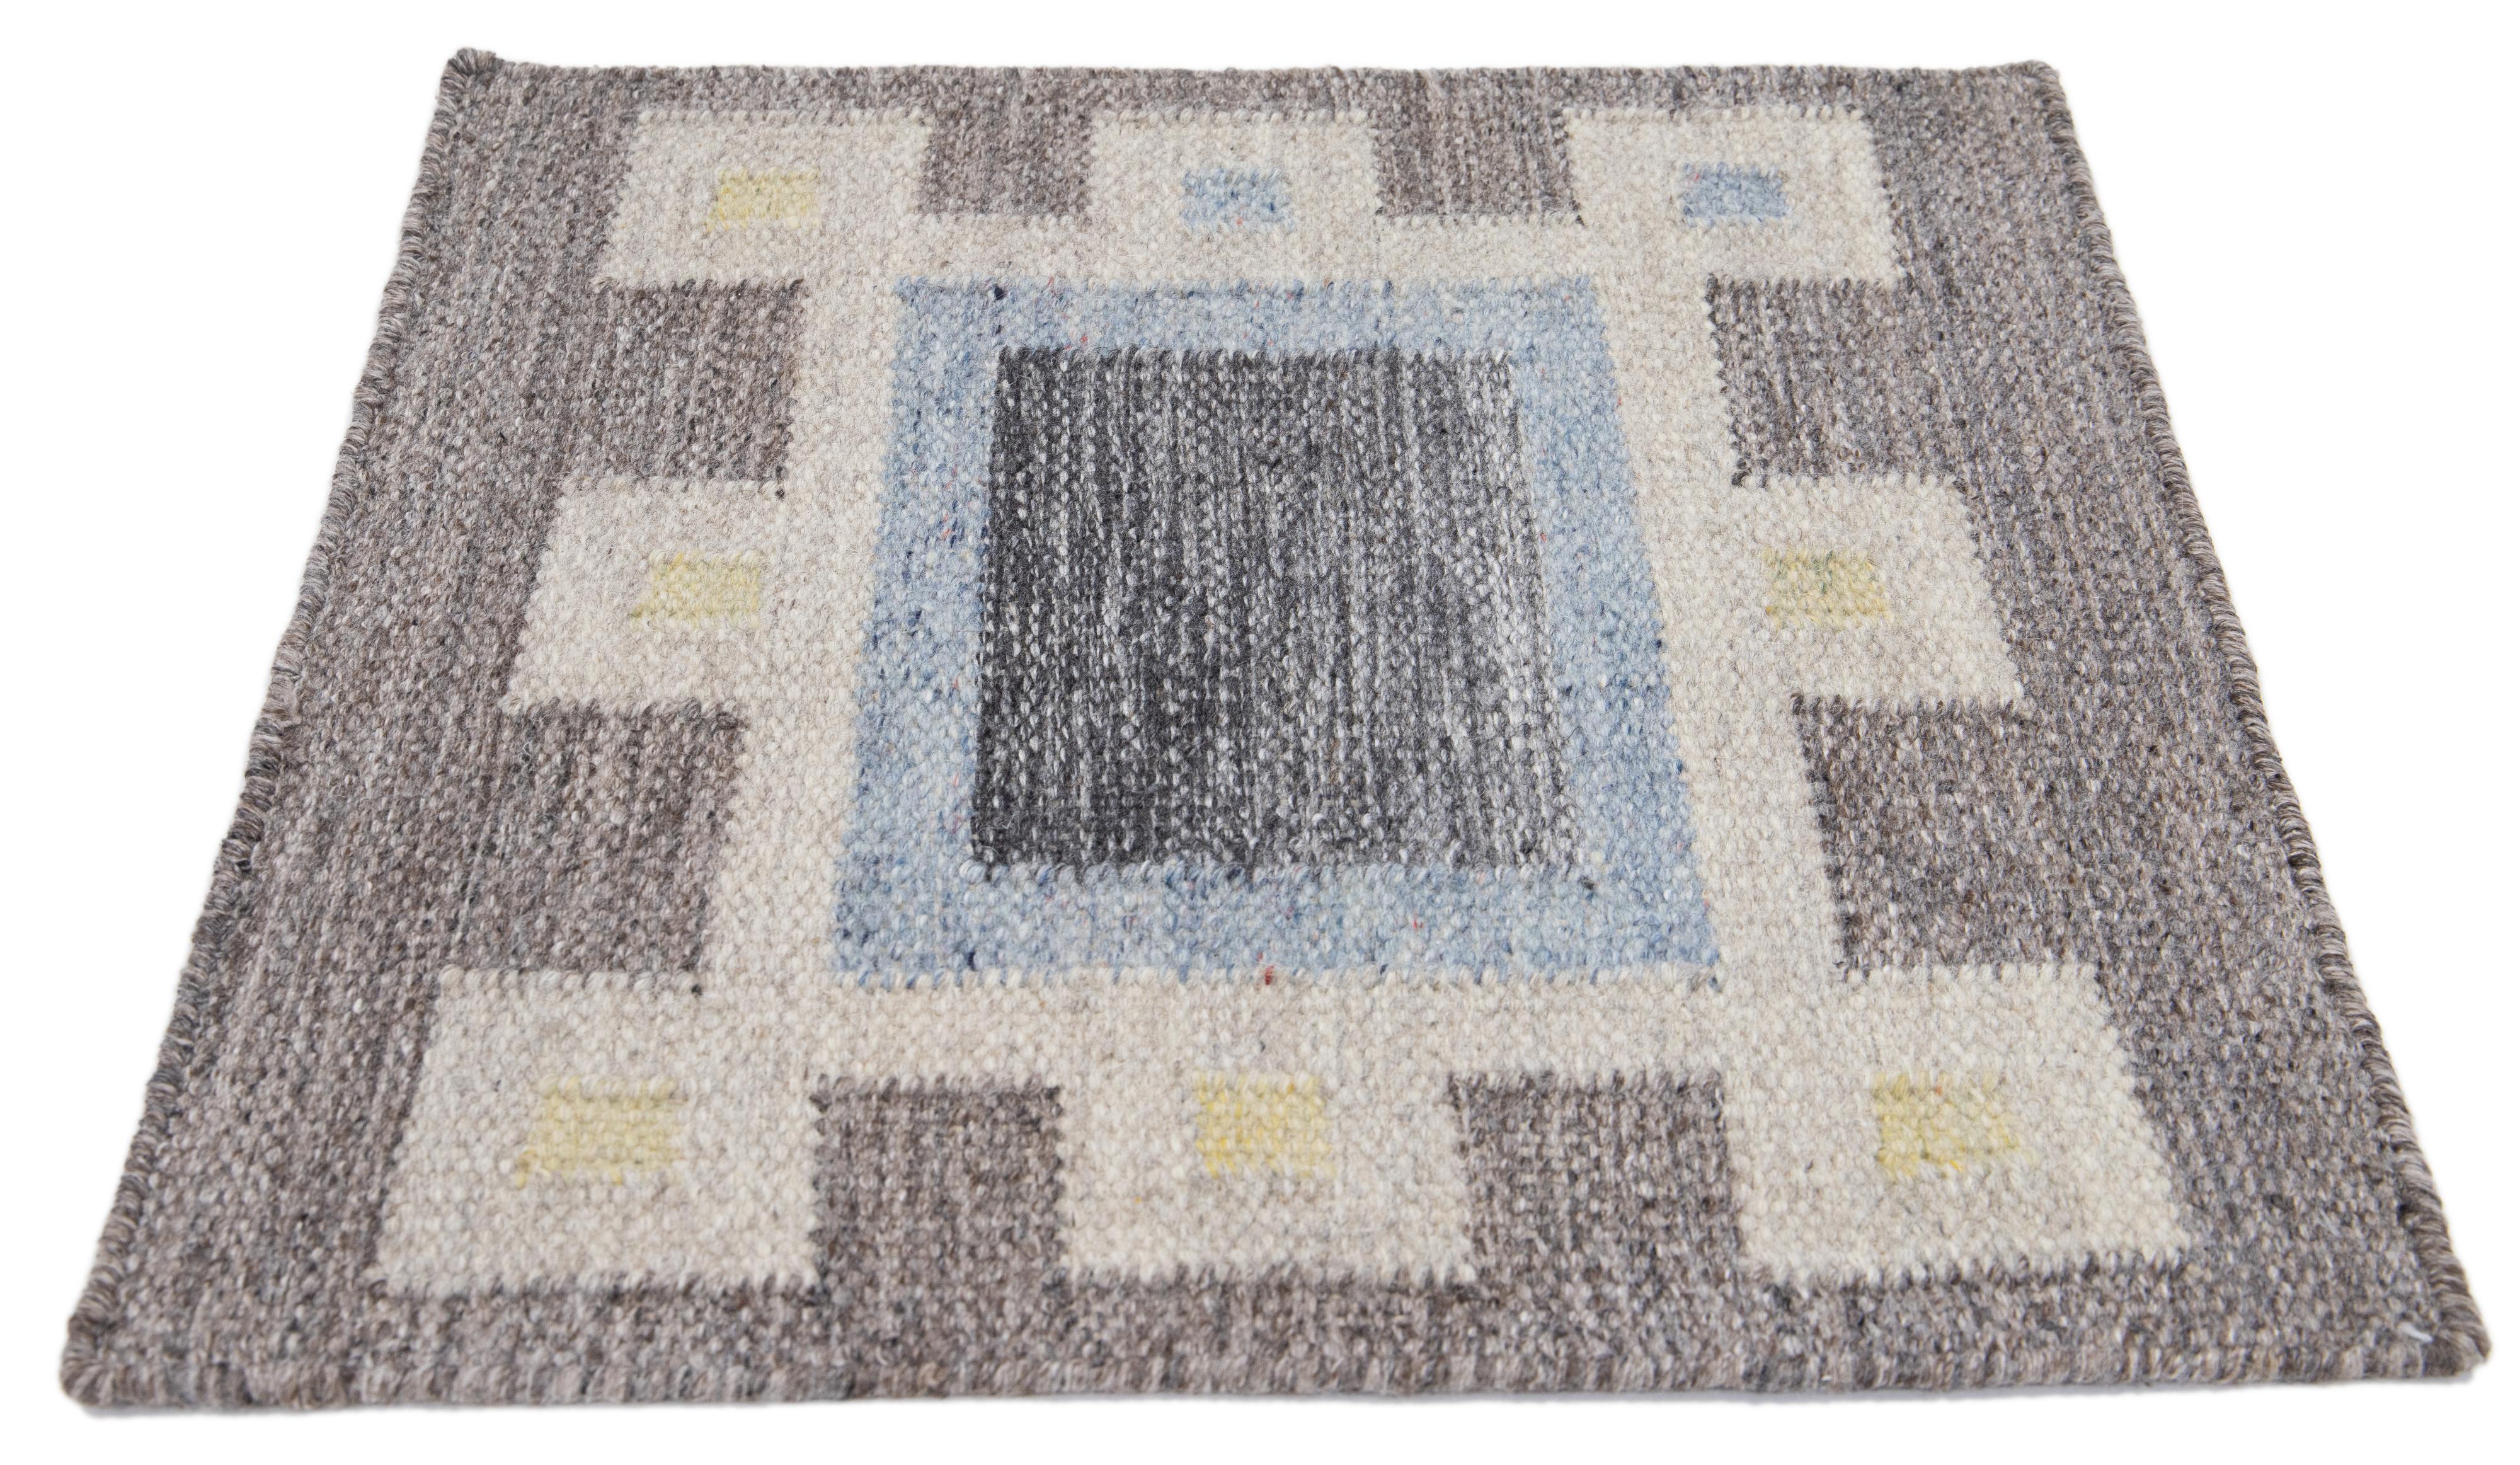 Apadana's Modern Swedish Style Handwoven wool custom rug. Custom sizes and colors made-to-order. 

Material: Wool 
Techniques: Hand-Woven
Style: Swedish 
Lead time: Approx. 15-16 wks available 
Colors: As shown, other custom colors are